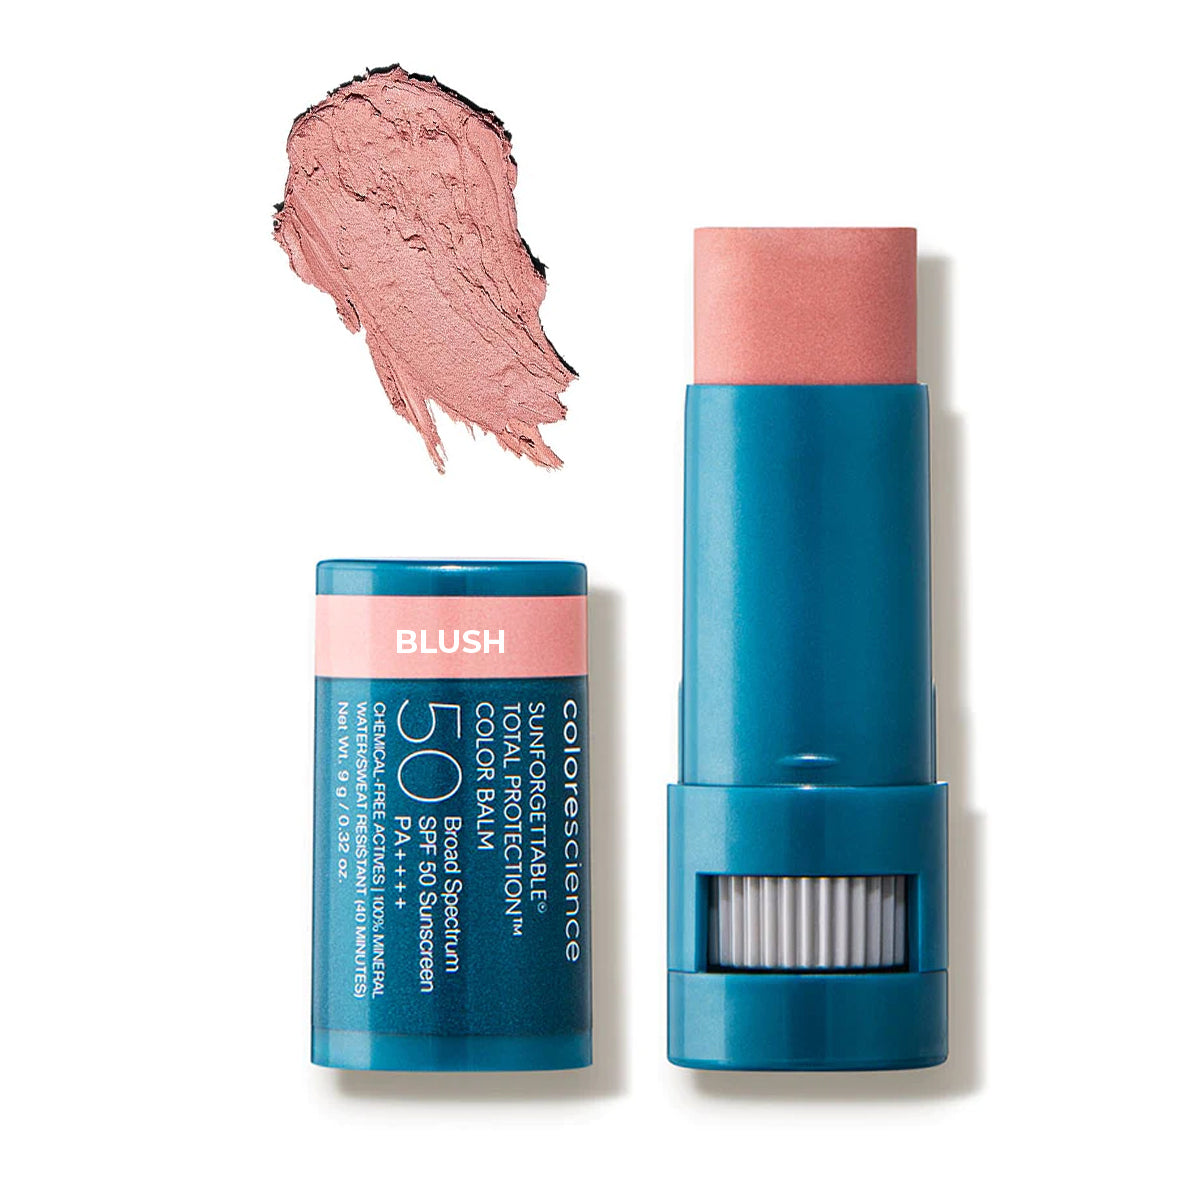 Sunforgettable® Total Protection™ Color Balm SPF 50 - Blush